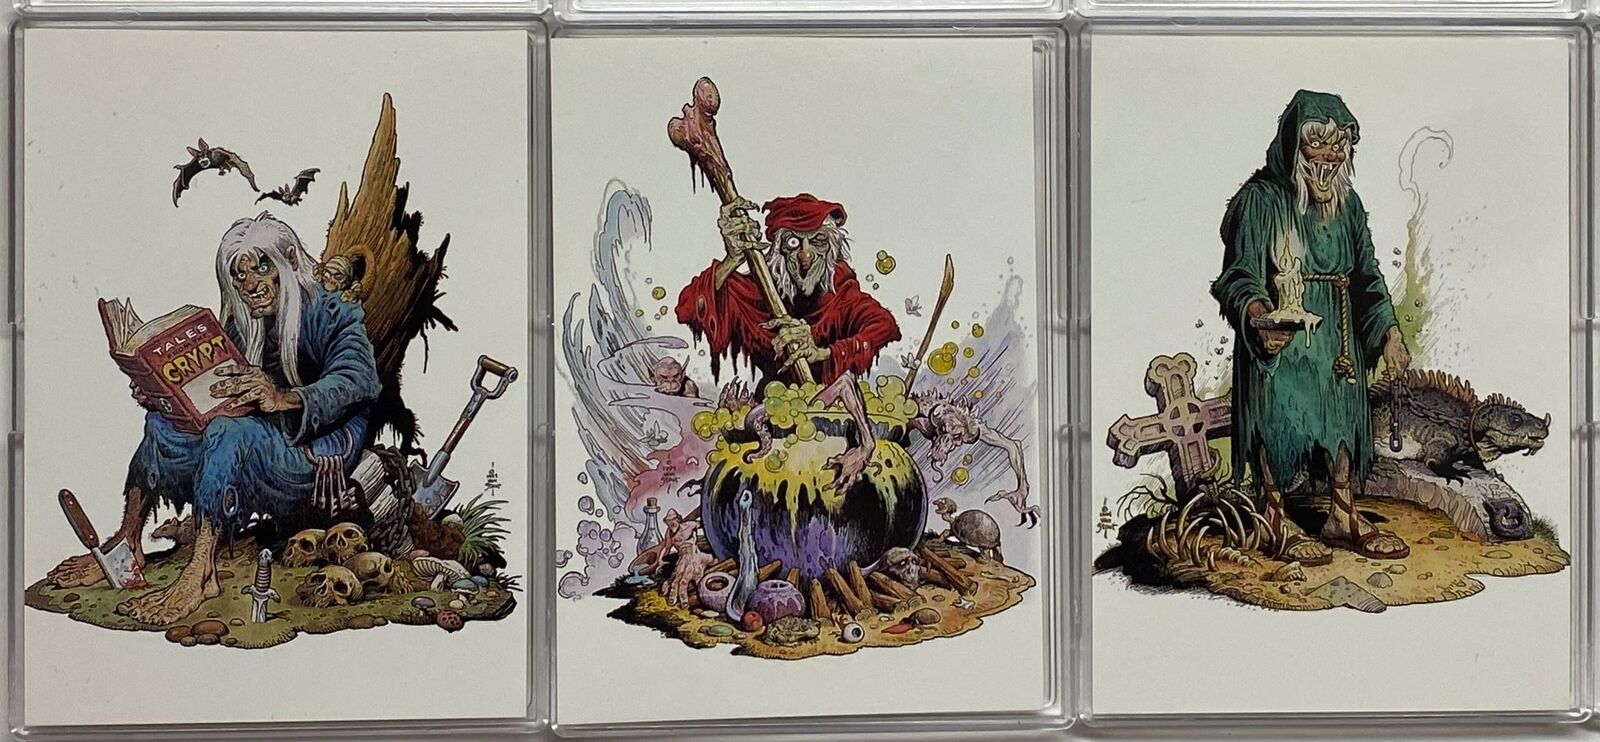 1996 William Stout Saurians and Sorcerers Series 3 EC Subset Chase Card Set 1-3